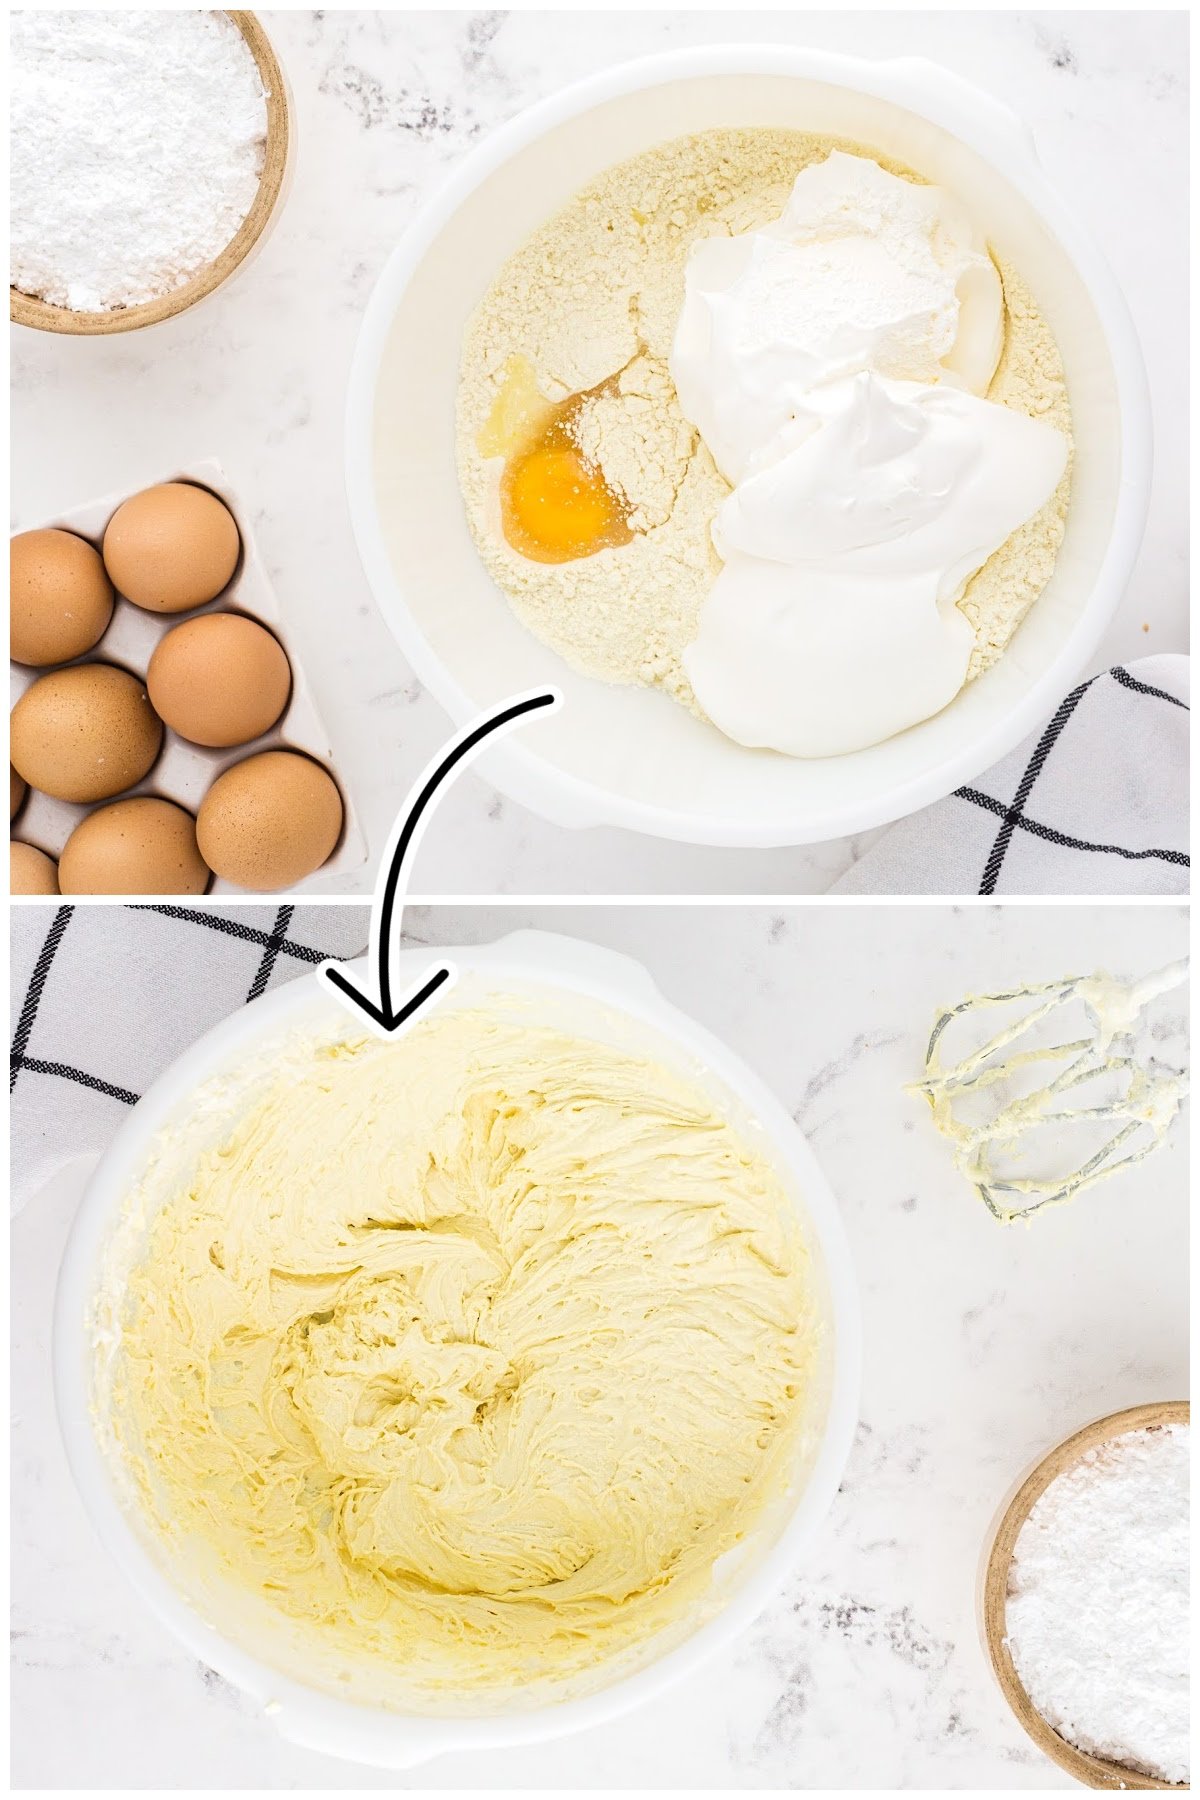 Egg, cool whip, and boxed cake mix in a mixing bowl.